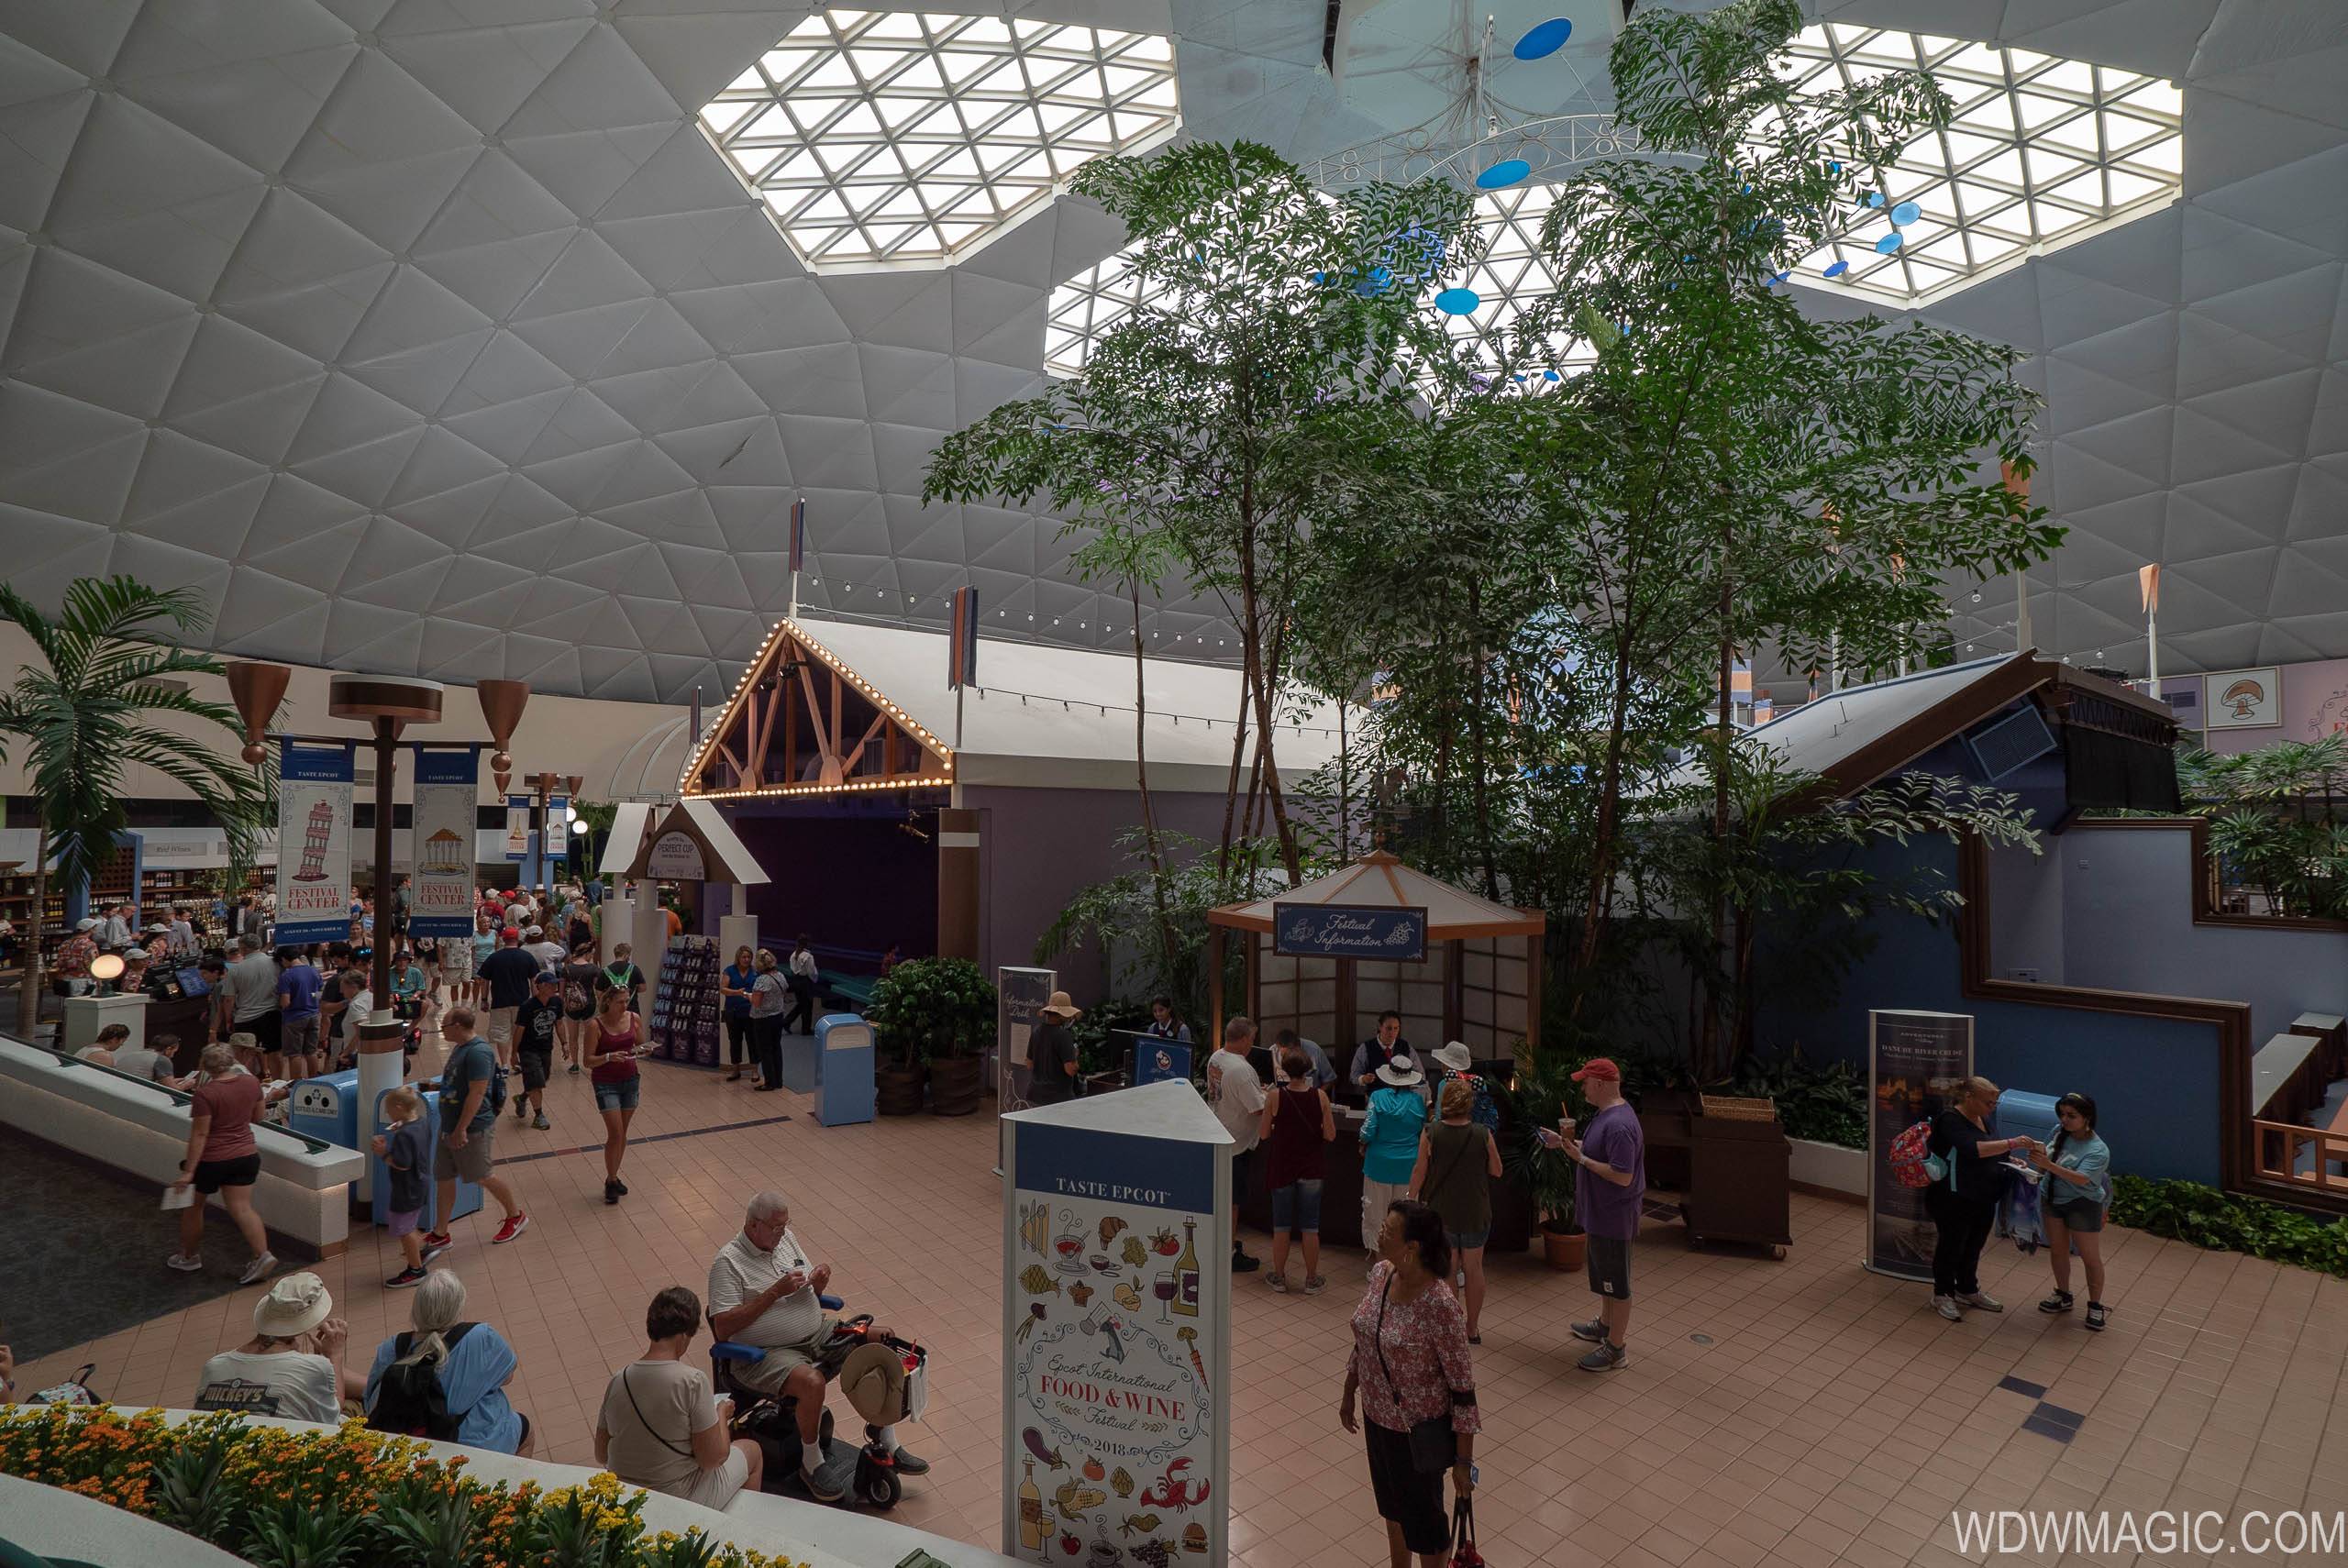 Wonders of Life has most recently been used as event space for Epcot's Festivals